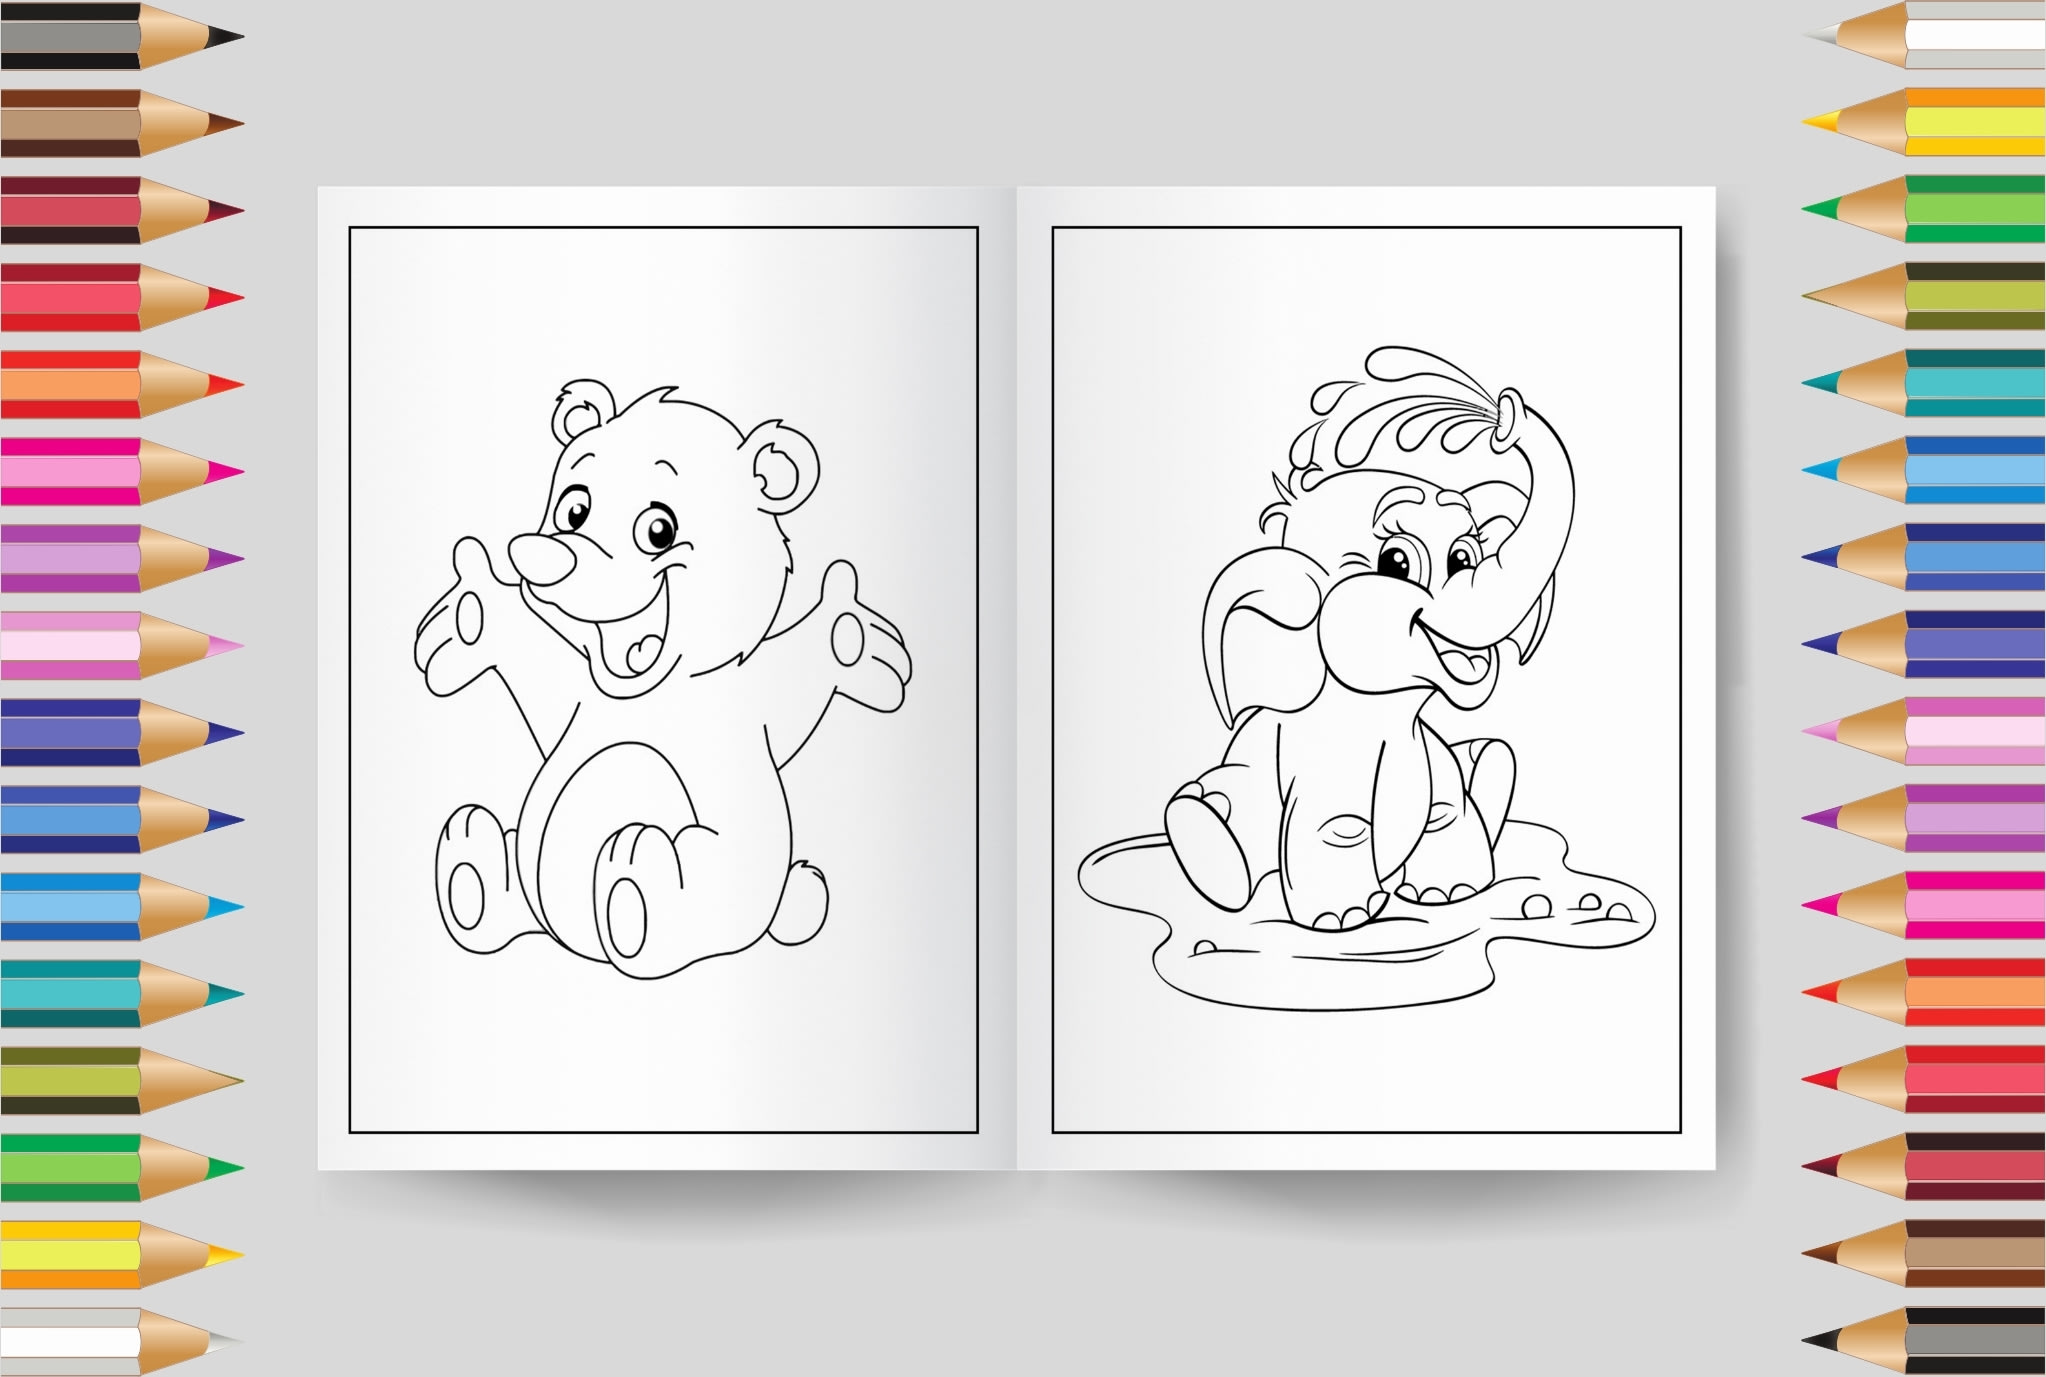 Make kids coloring book interior for your kdp books by Iaml20mon ...